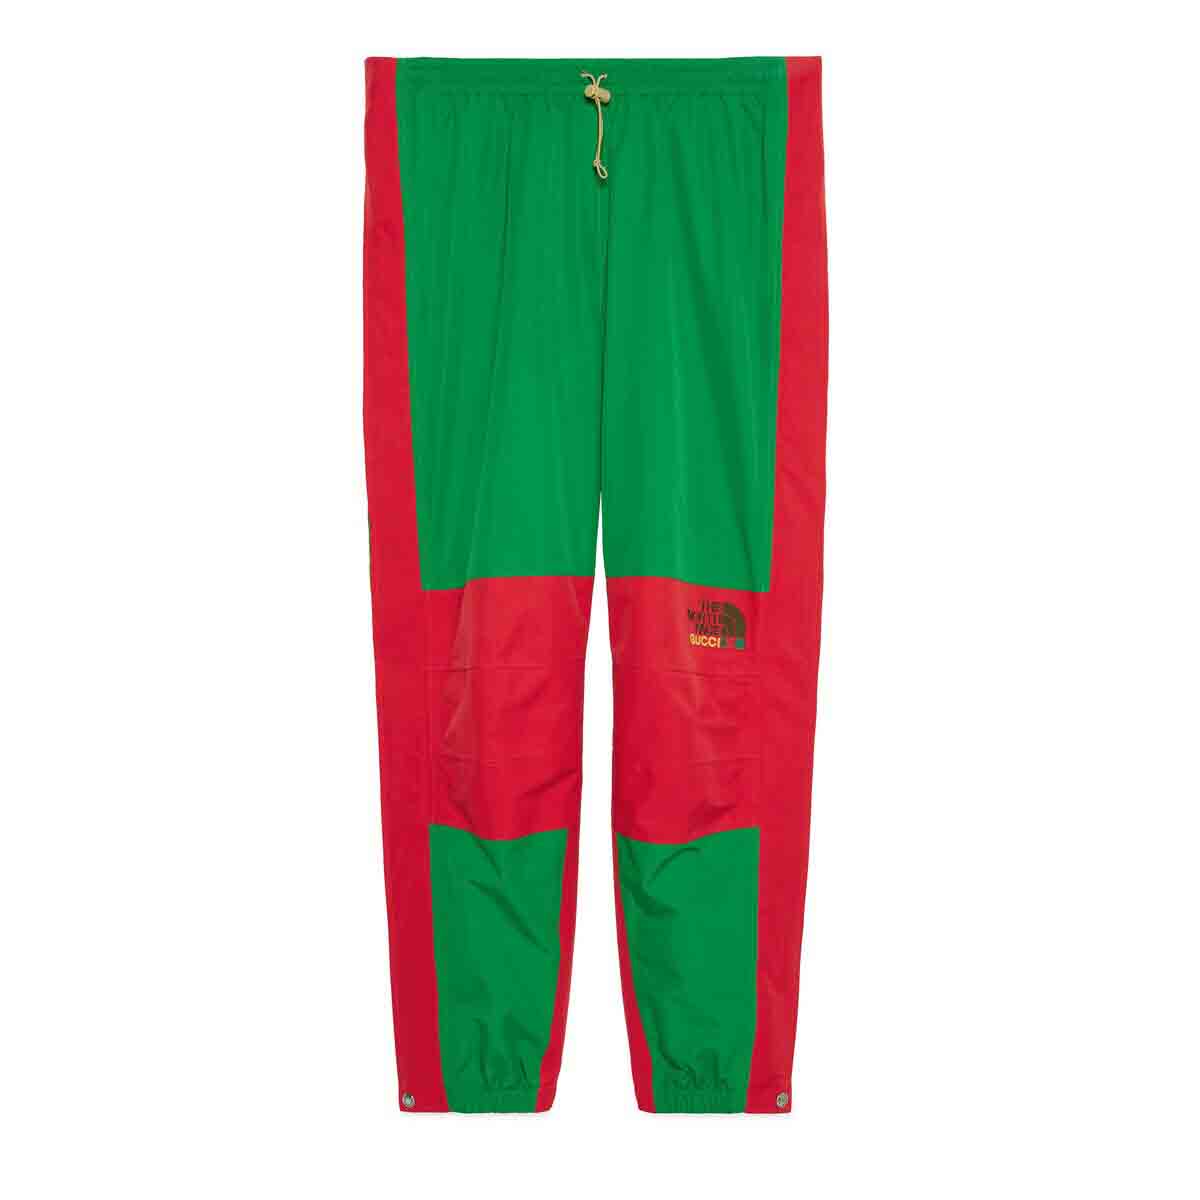 Gucci x The North Face Pant Green/Red